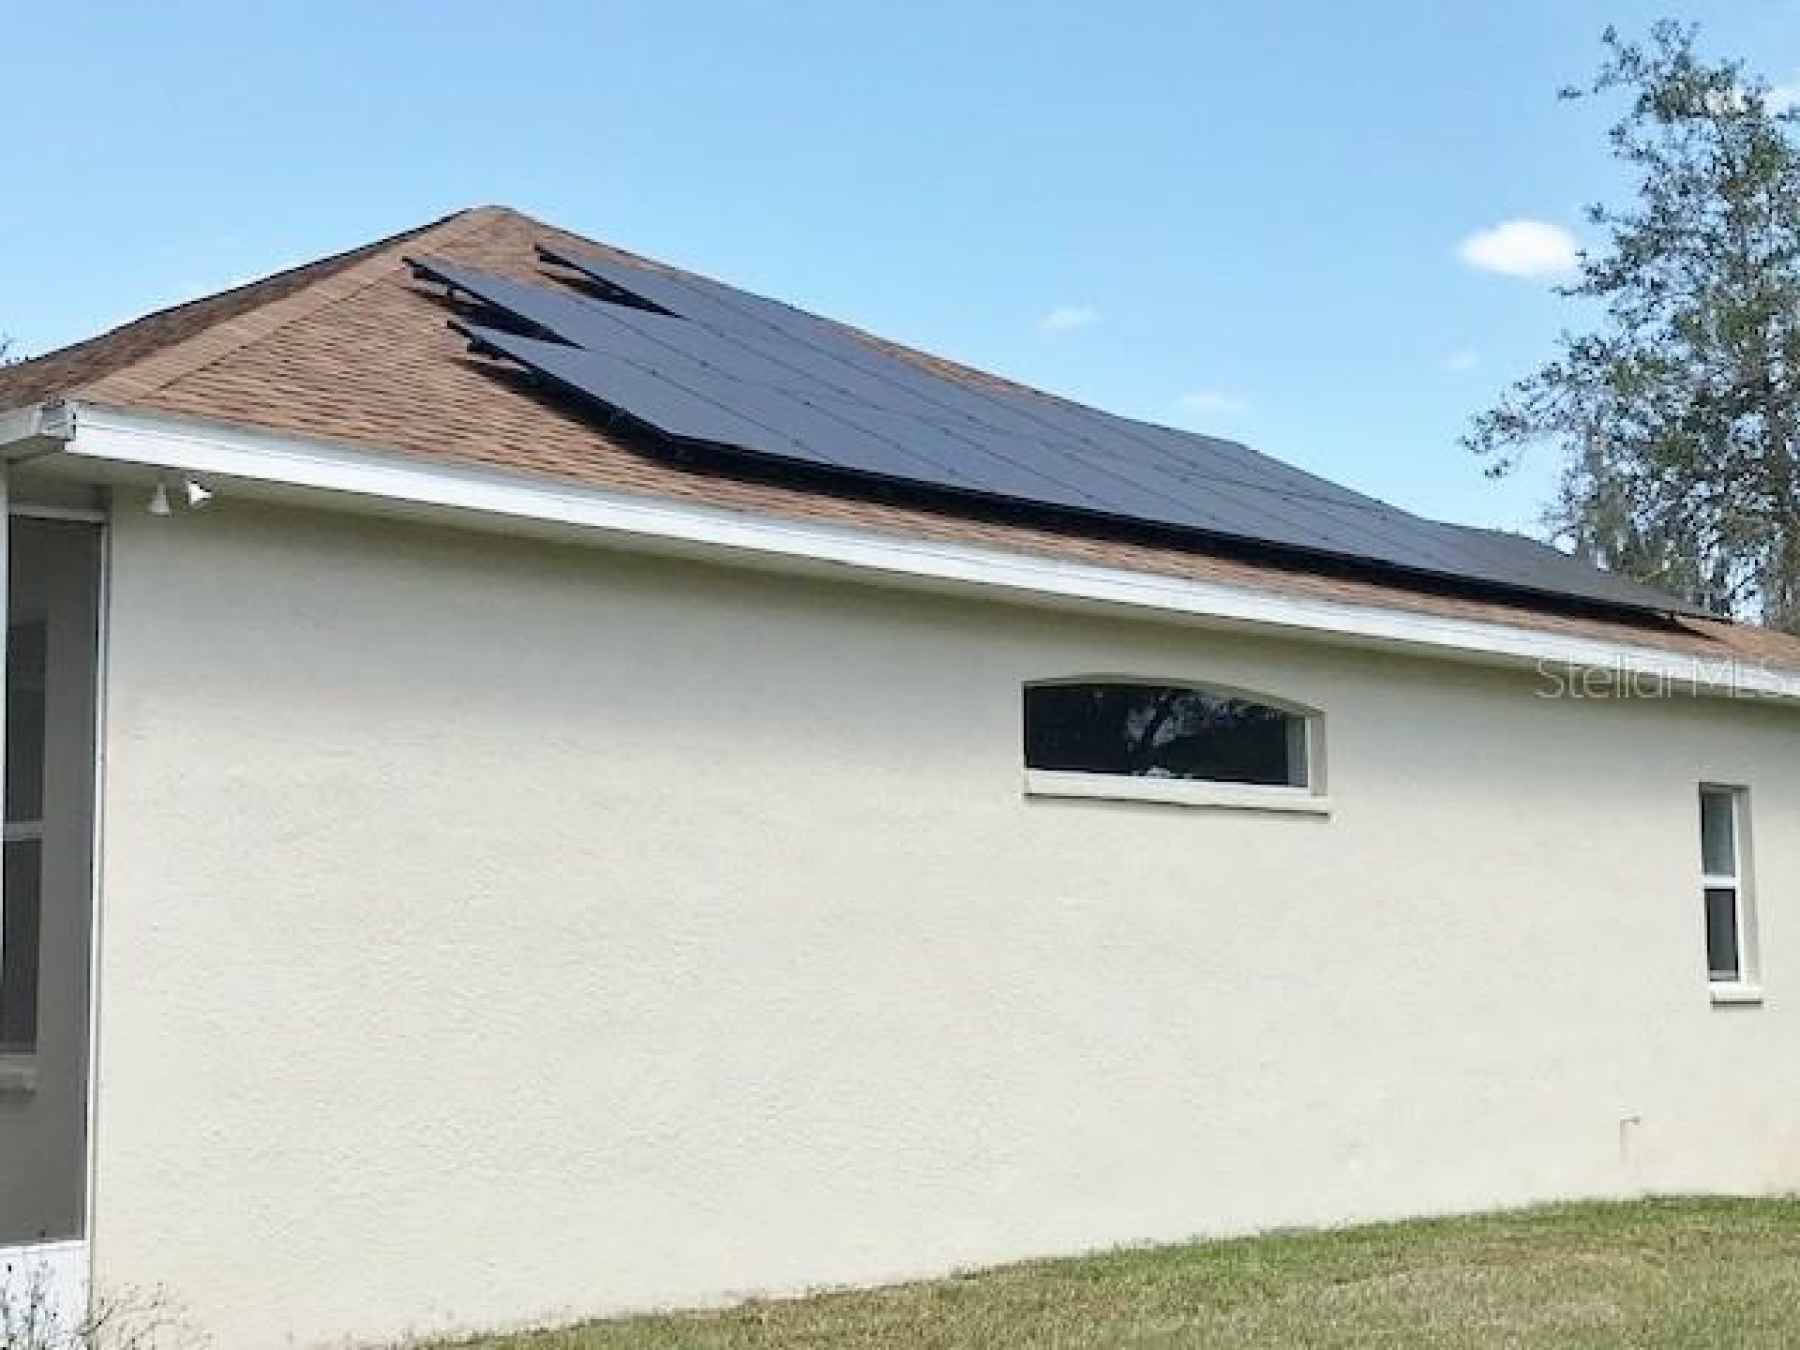 Right side of Home with energy provided solar panels